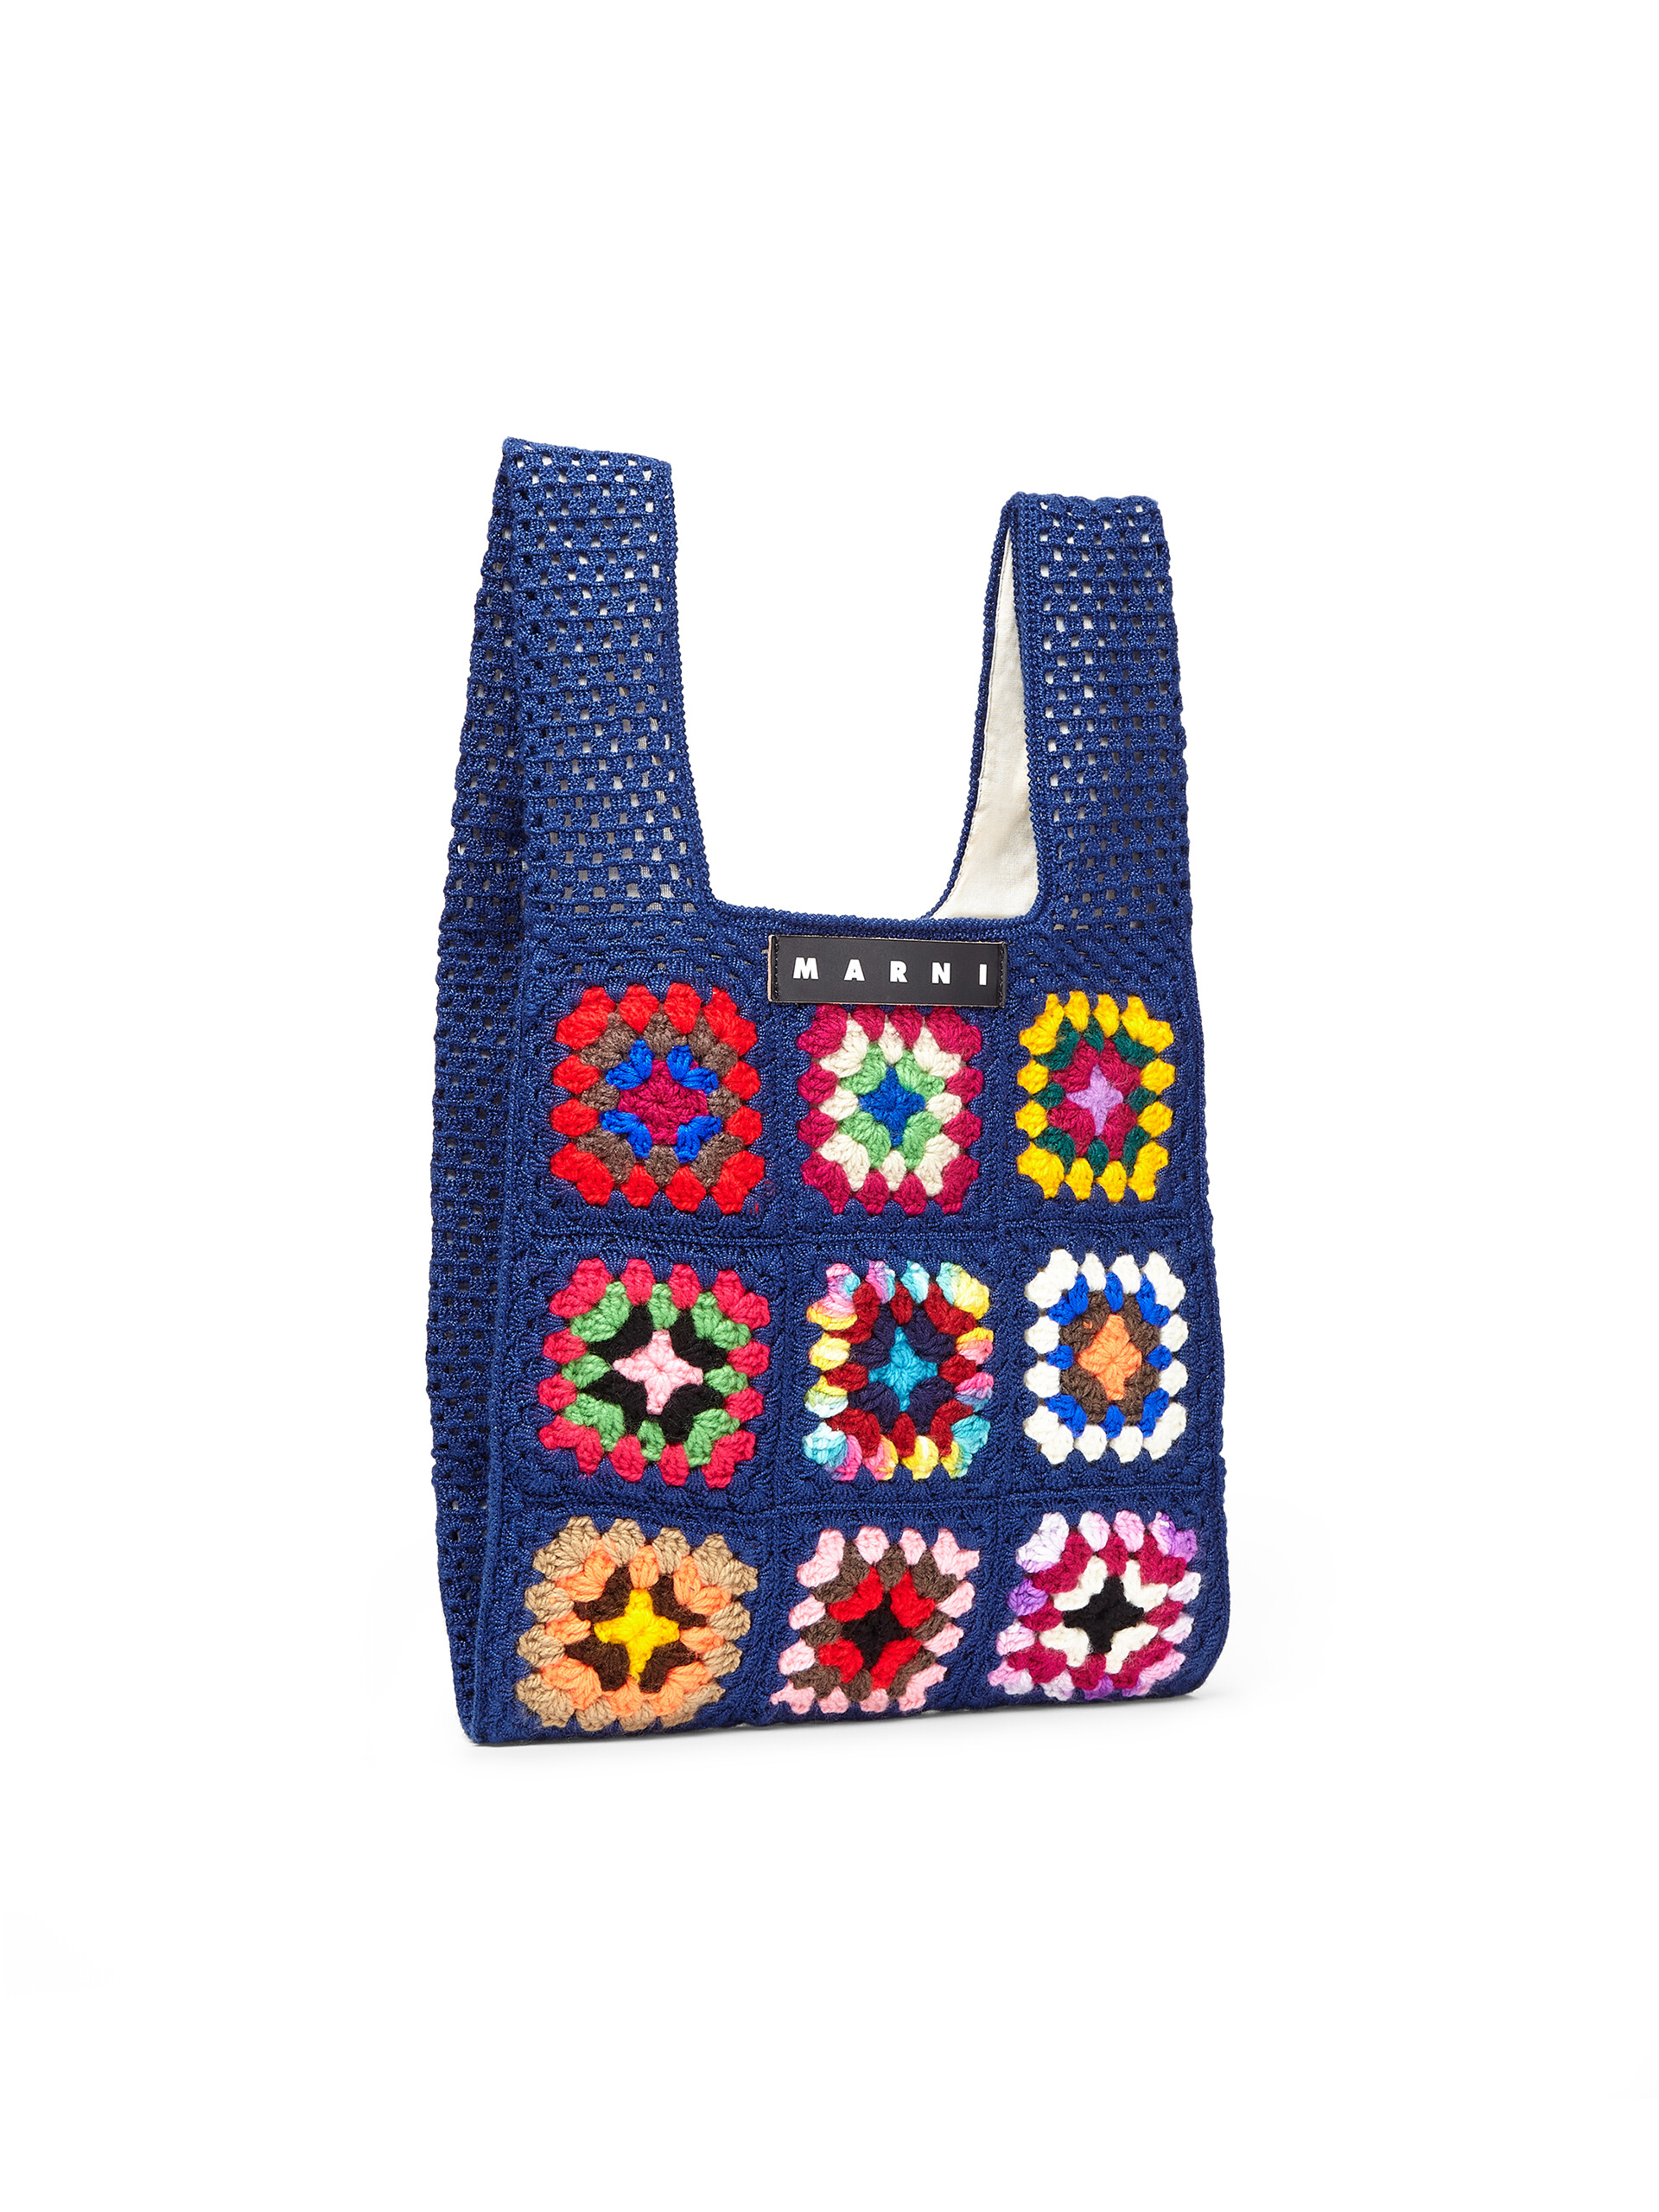 Shopping bag MARNI MARKET with patchwork floral motif in blue crochet polyester - Bags - Image 2